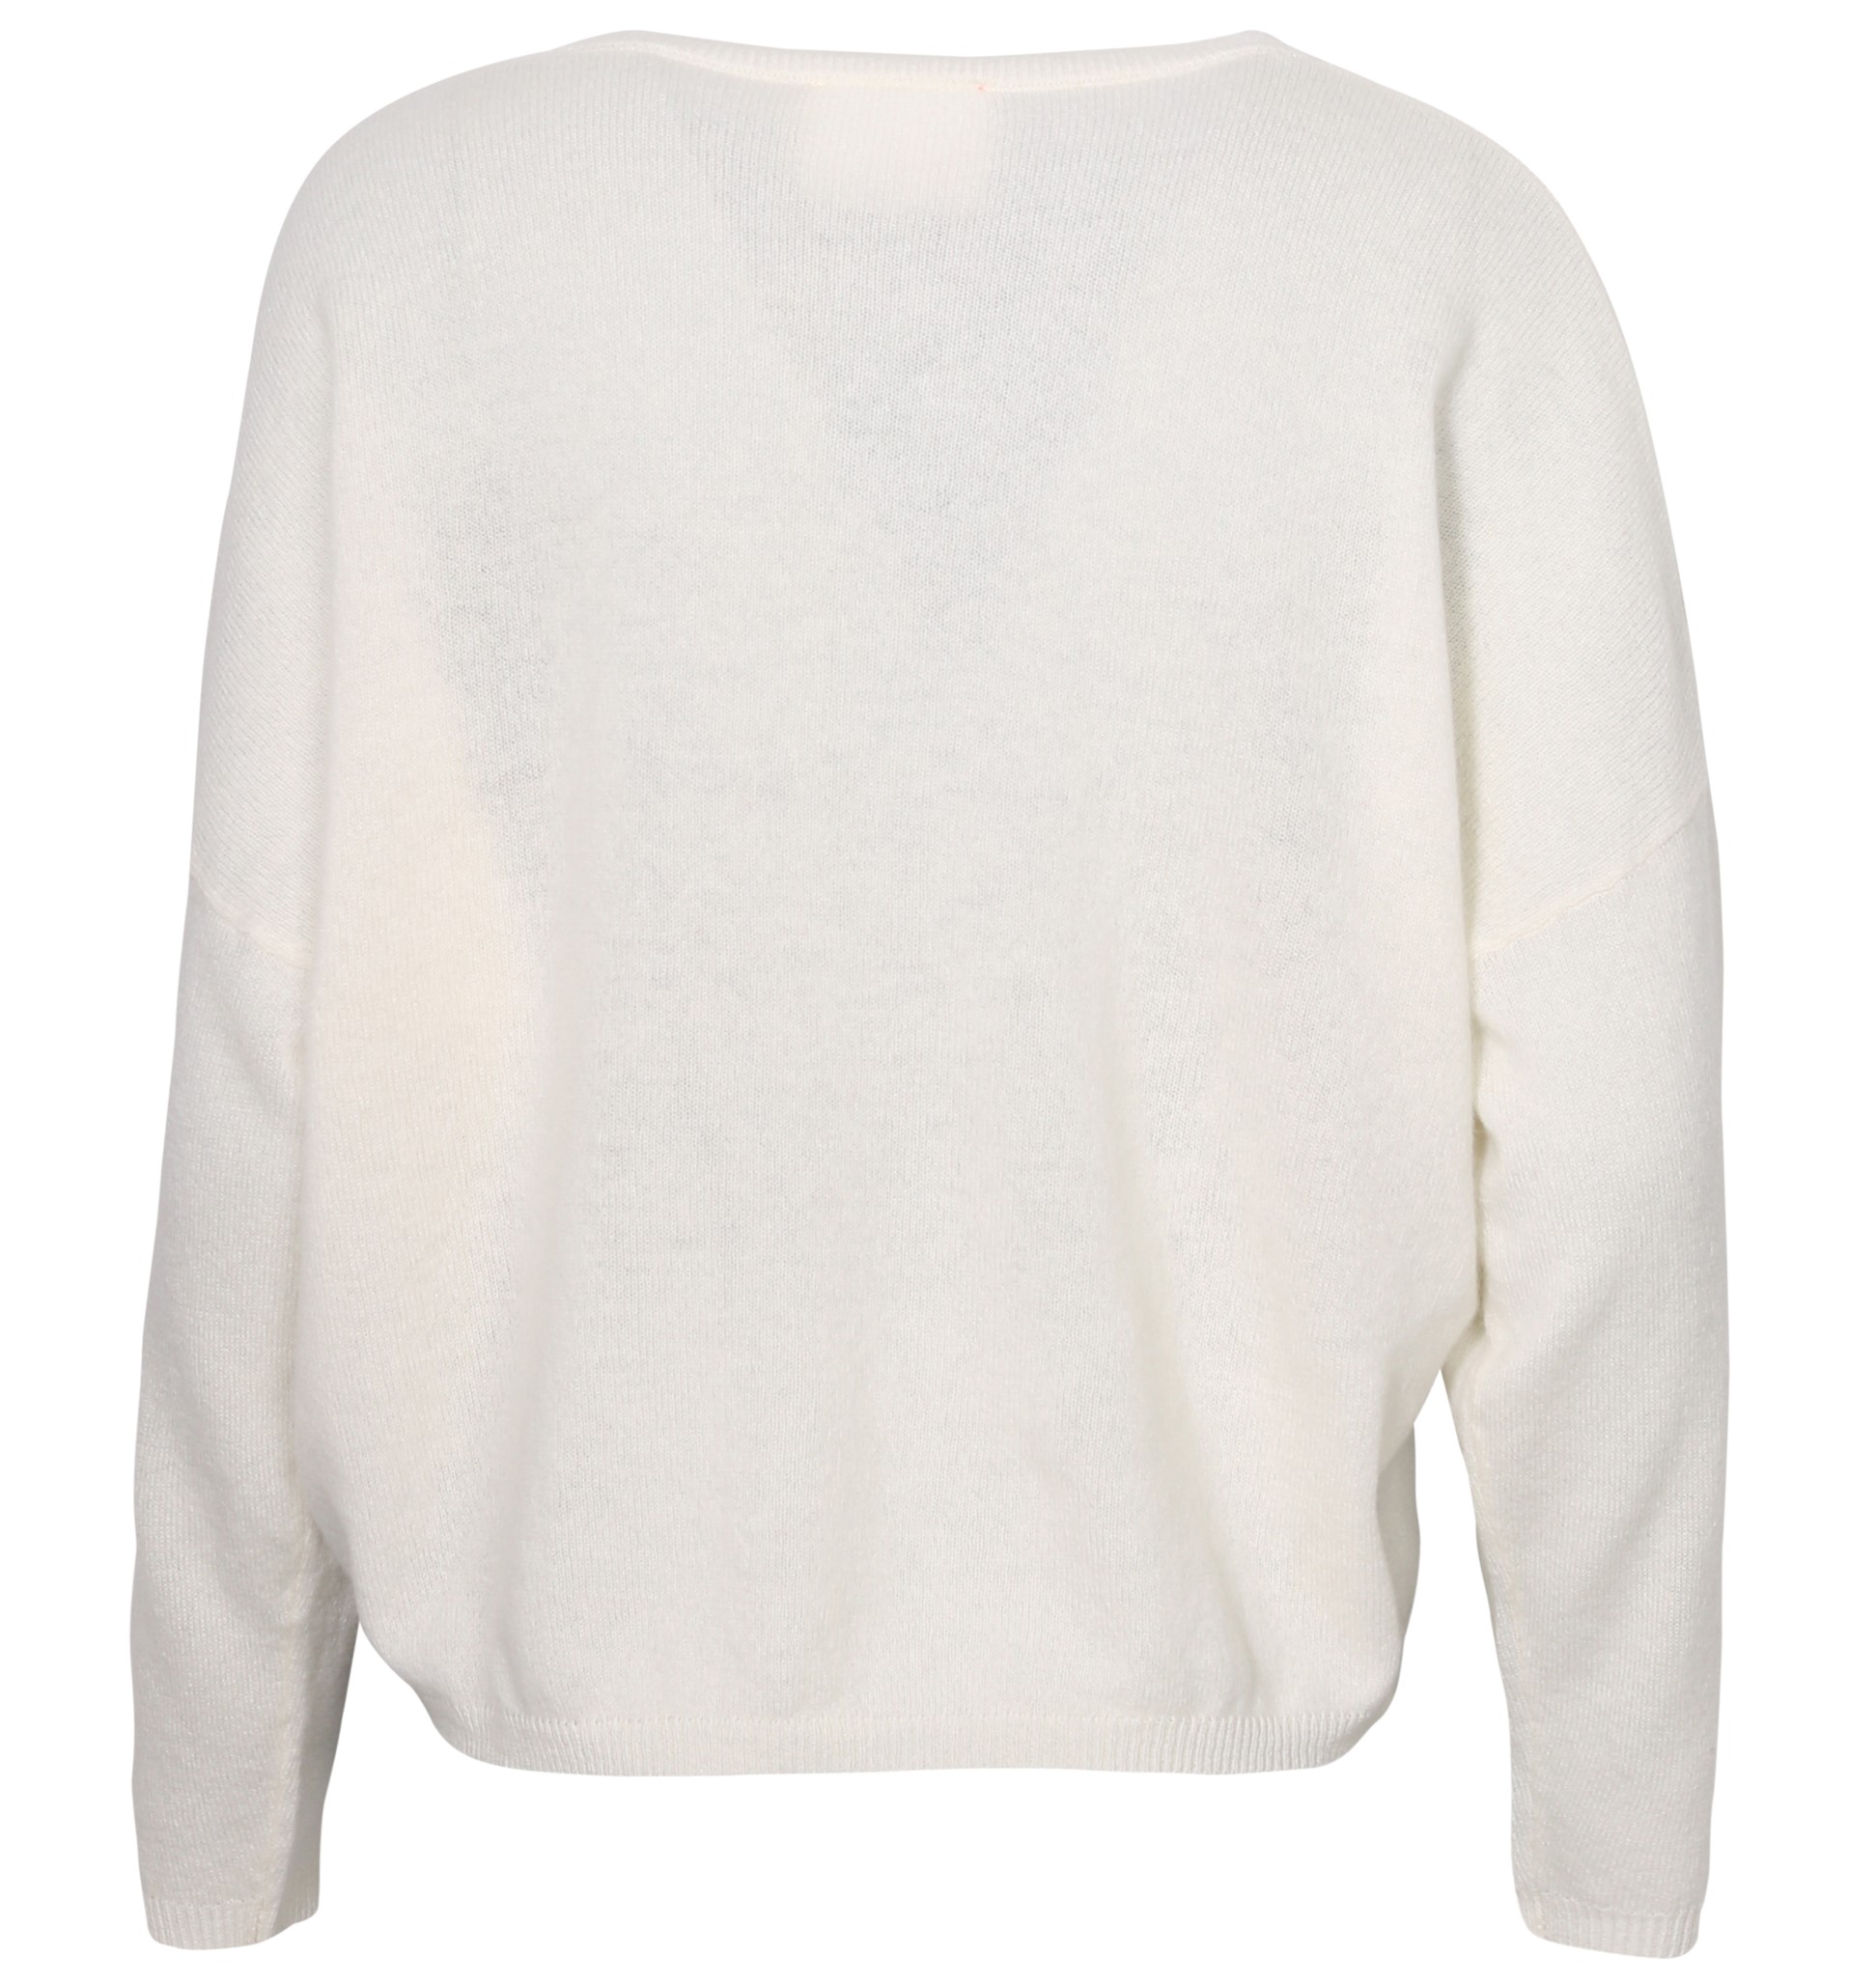 ABSOLUT CASHMERE V-Neck Sweater Alicia in Offwhite L